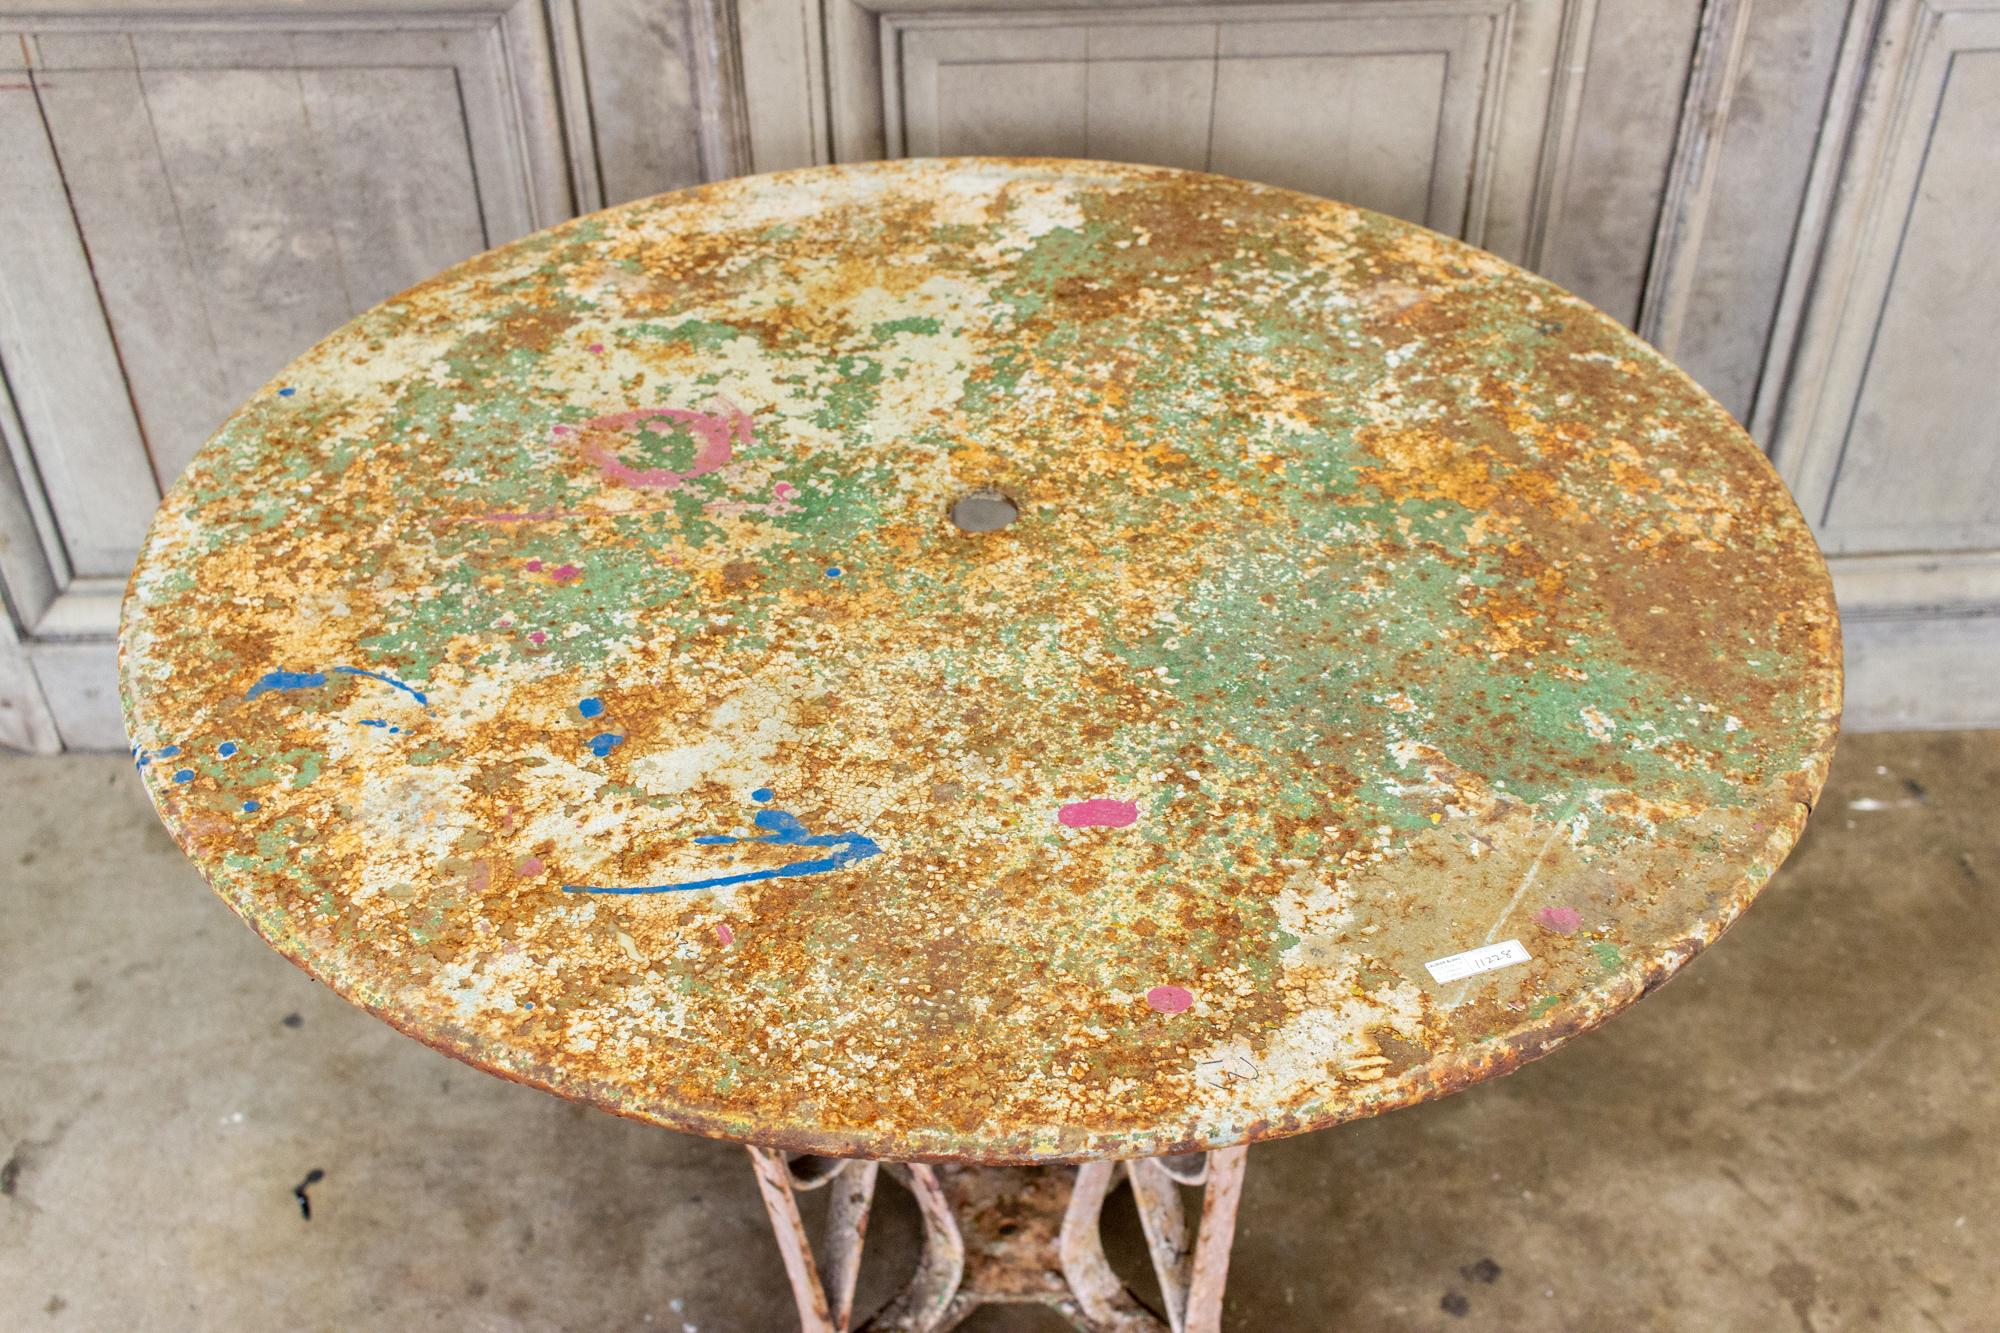 This stunning antique French garden table has fabulous scroll work in the base and an incredible distressed painted finish. The round top also features an opening at the top for drainage or an umbrella. The painted surface has tones of dusty pink,